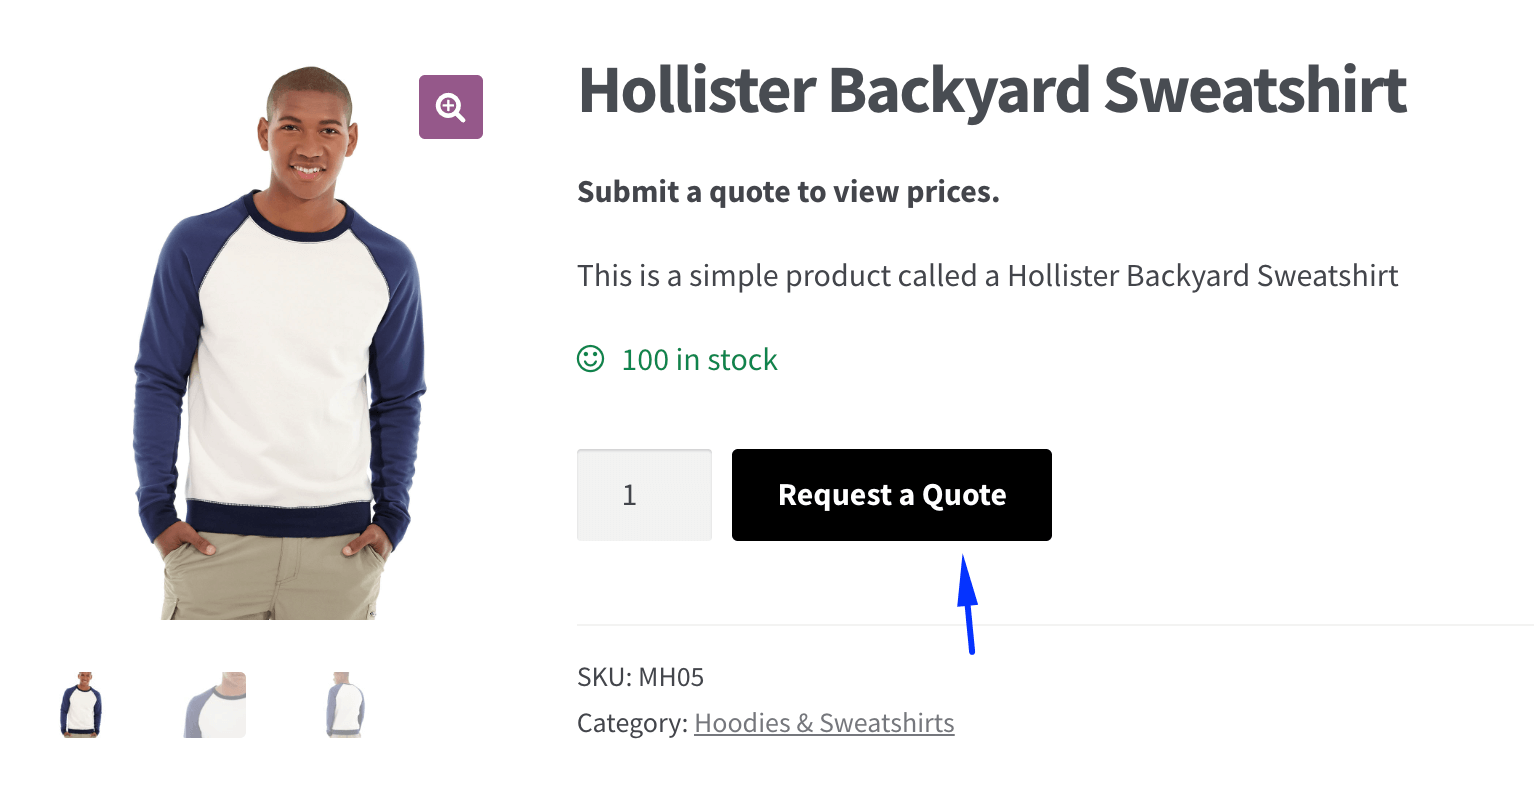 Single product with quote button